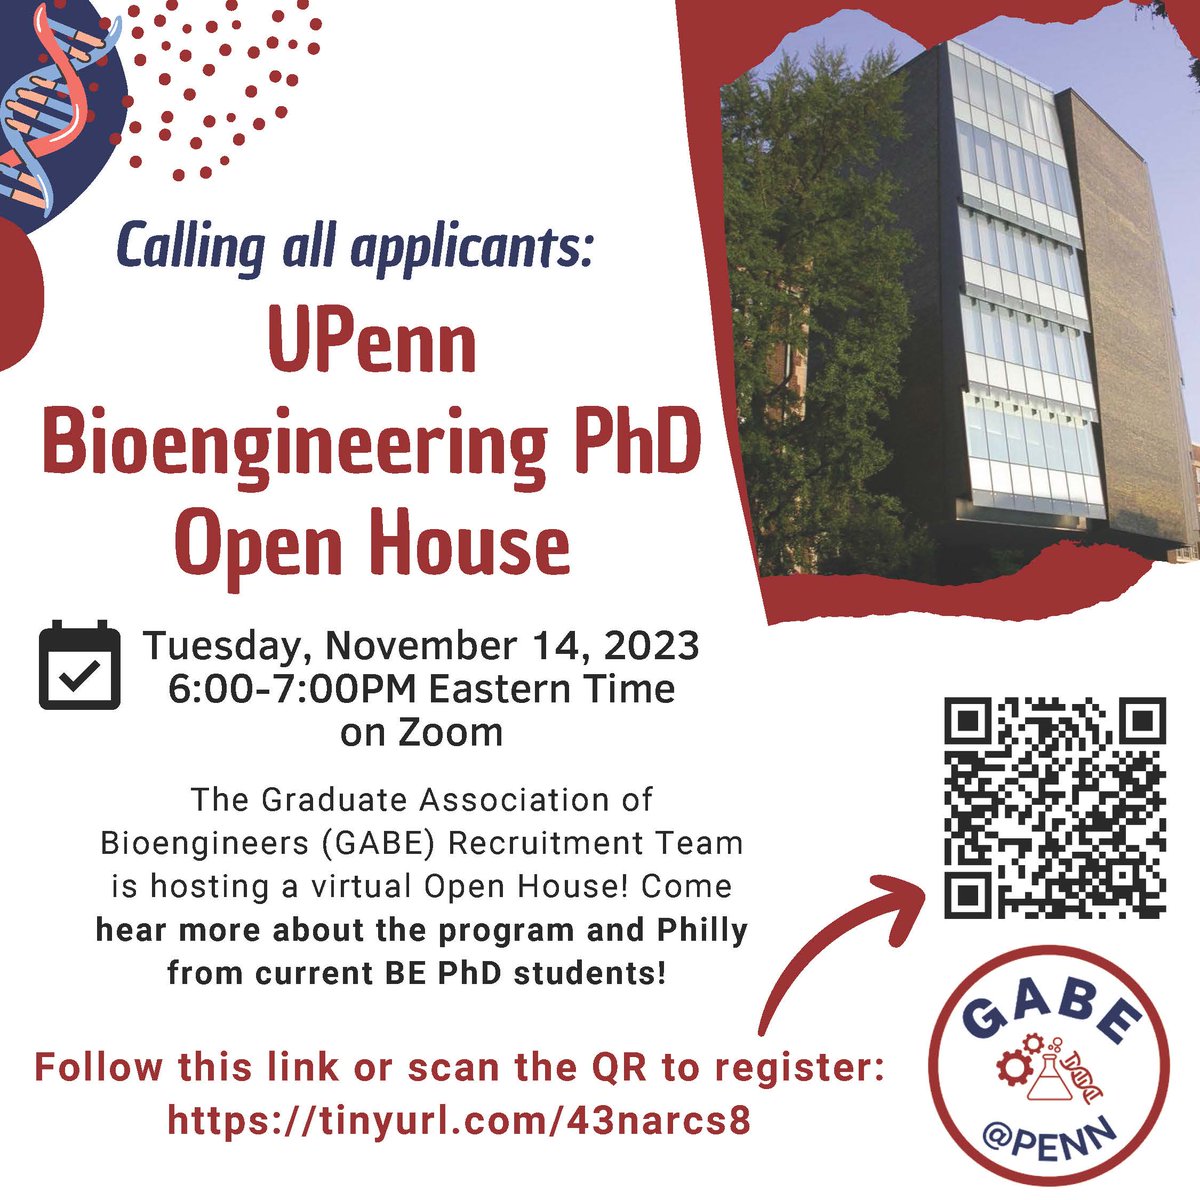 Interested in applying for a PhD in Bioengineering? Join @Penn_GABE for a virtual open house on Tuesday, November 14th. #PennBioengineering #BioMedicalEngineering Register here: bit.ly/3FEGseQ